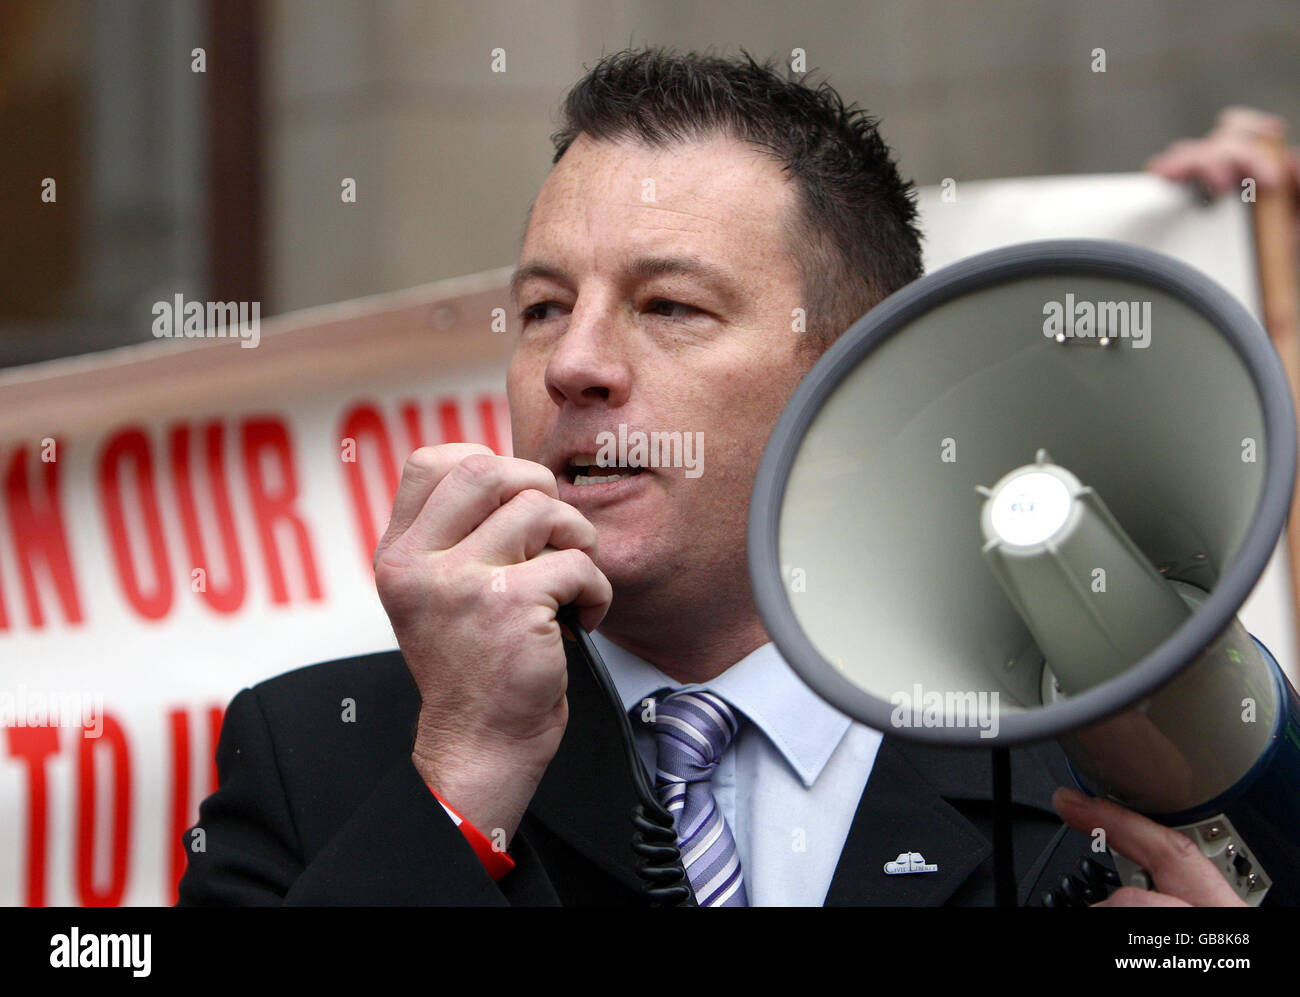 Teacher and British National Party member Adam Walker, from Houghton Kepier Sports College near Sunderland, stands outside a General Teaching Council hearing in Birmingham, where he is accused of religious intolerance while contributing to a right-wing website. Stock Photo